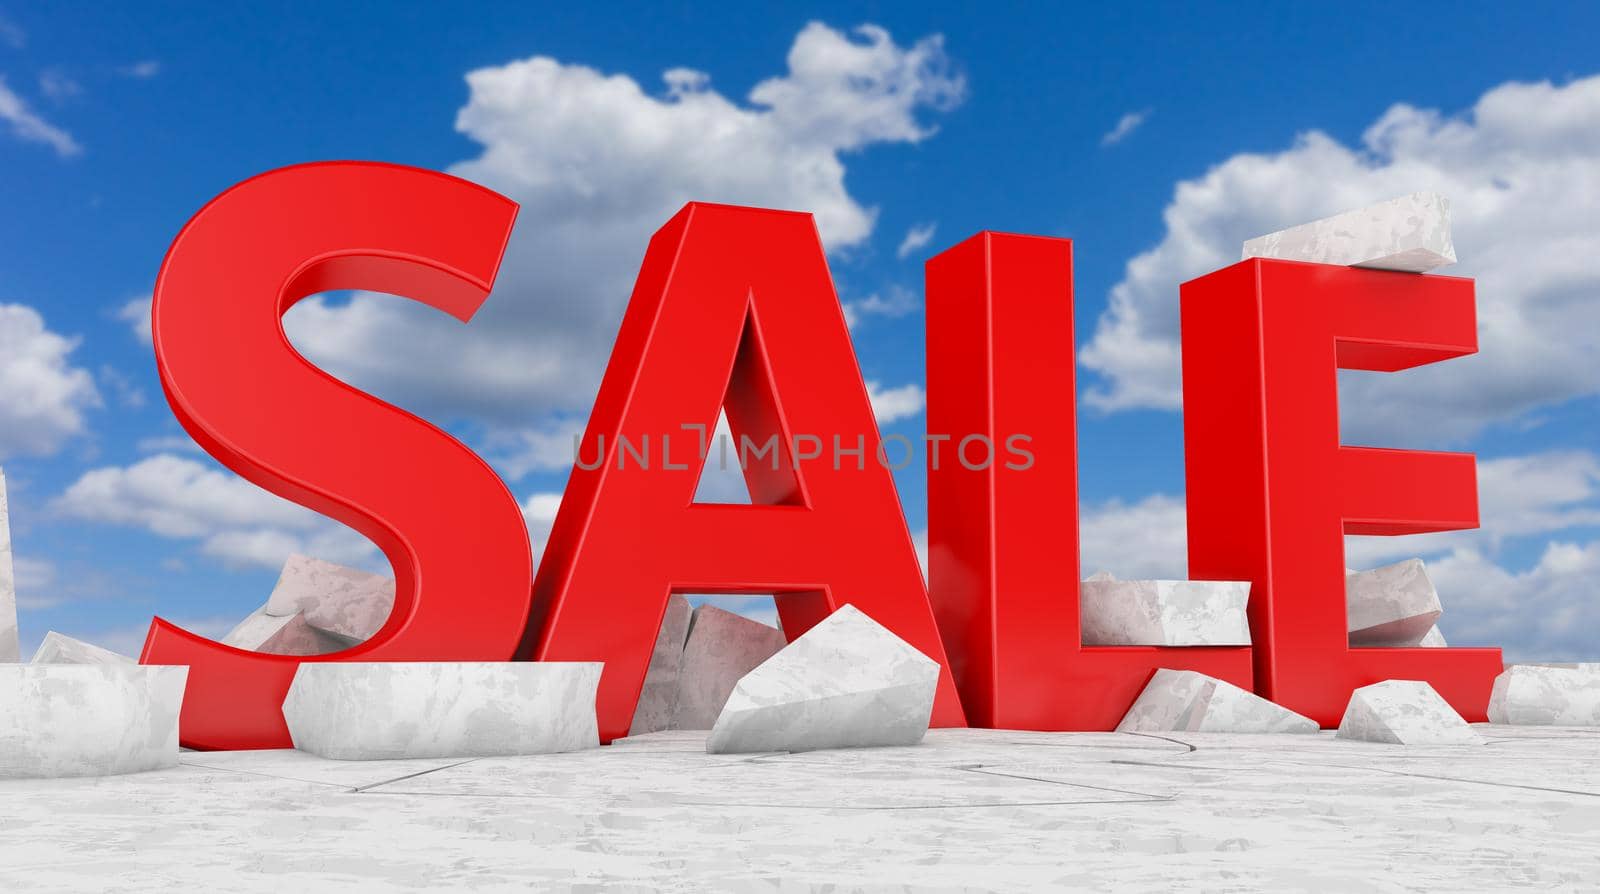 The voluminous figure SALE against the background of the broken ice. 3d rendering.